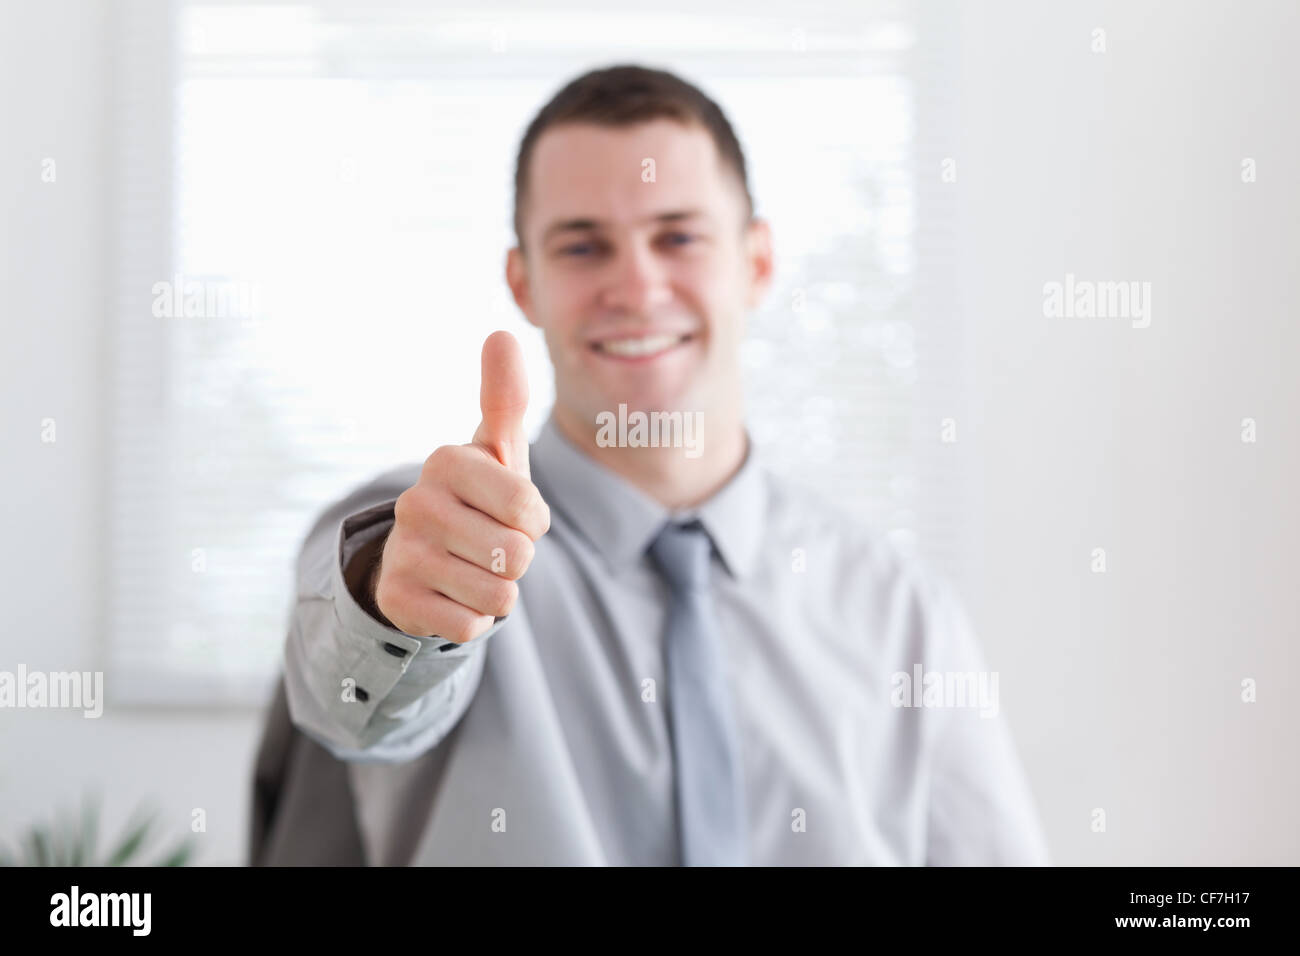 Smiling businessman approves Stock Photo